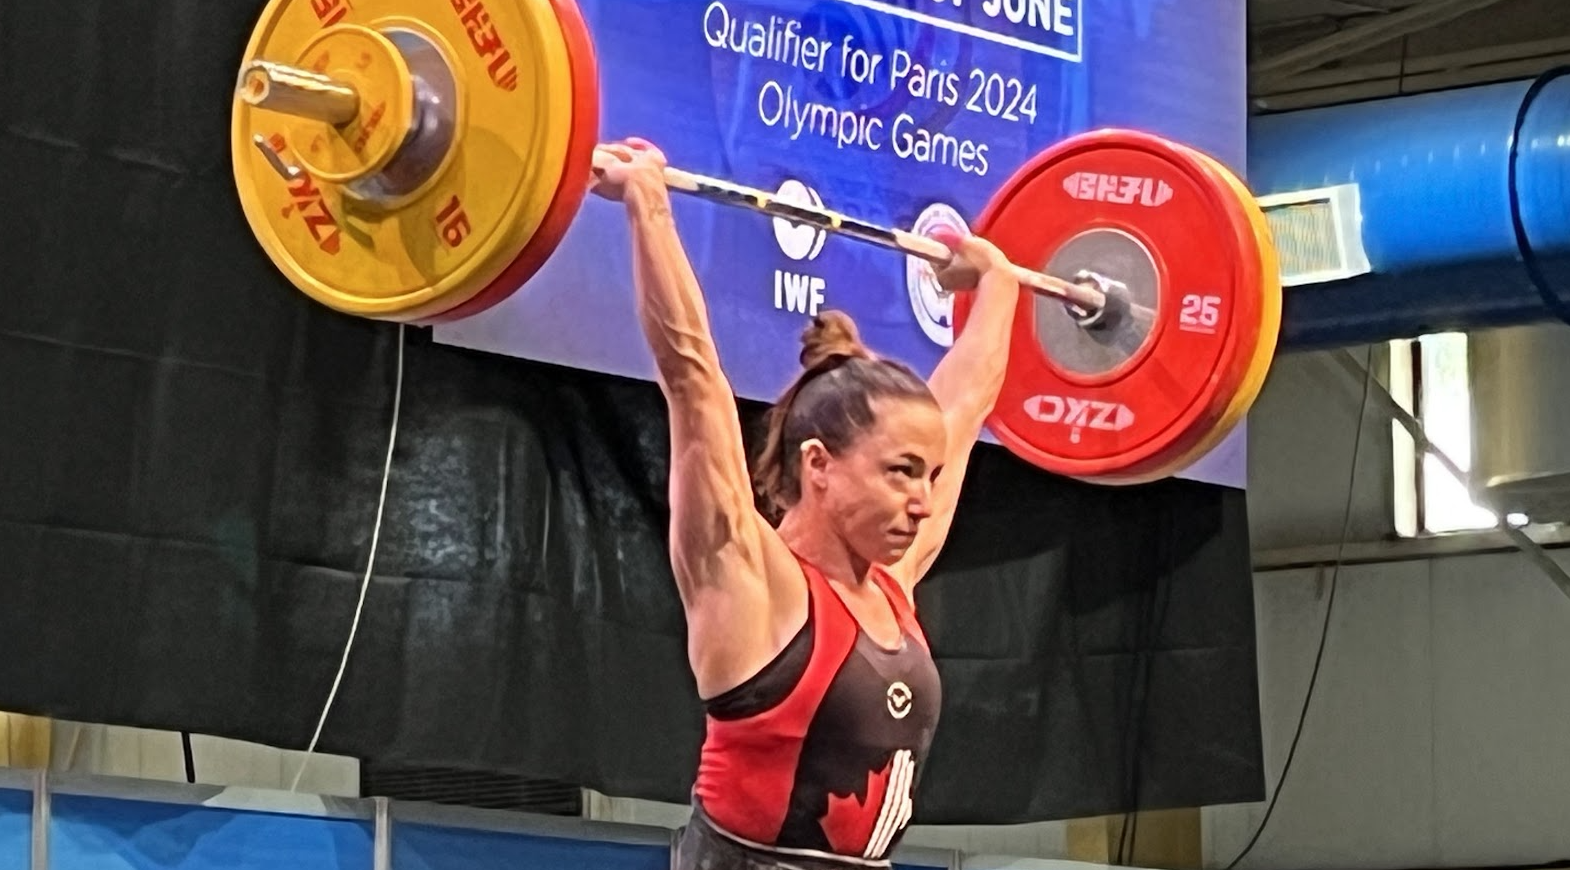 Canada's Josee Gallant, a late starter in weightlifting, made the podium for the second time in only her fourth international event ©ITG